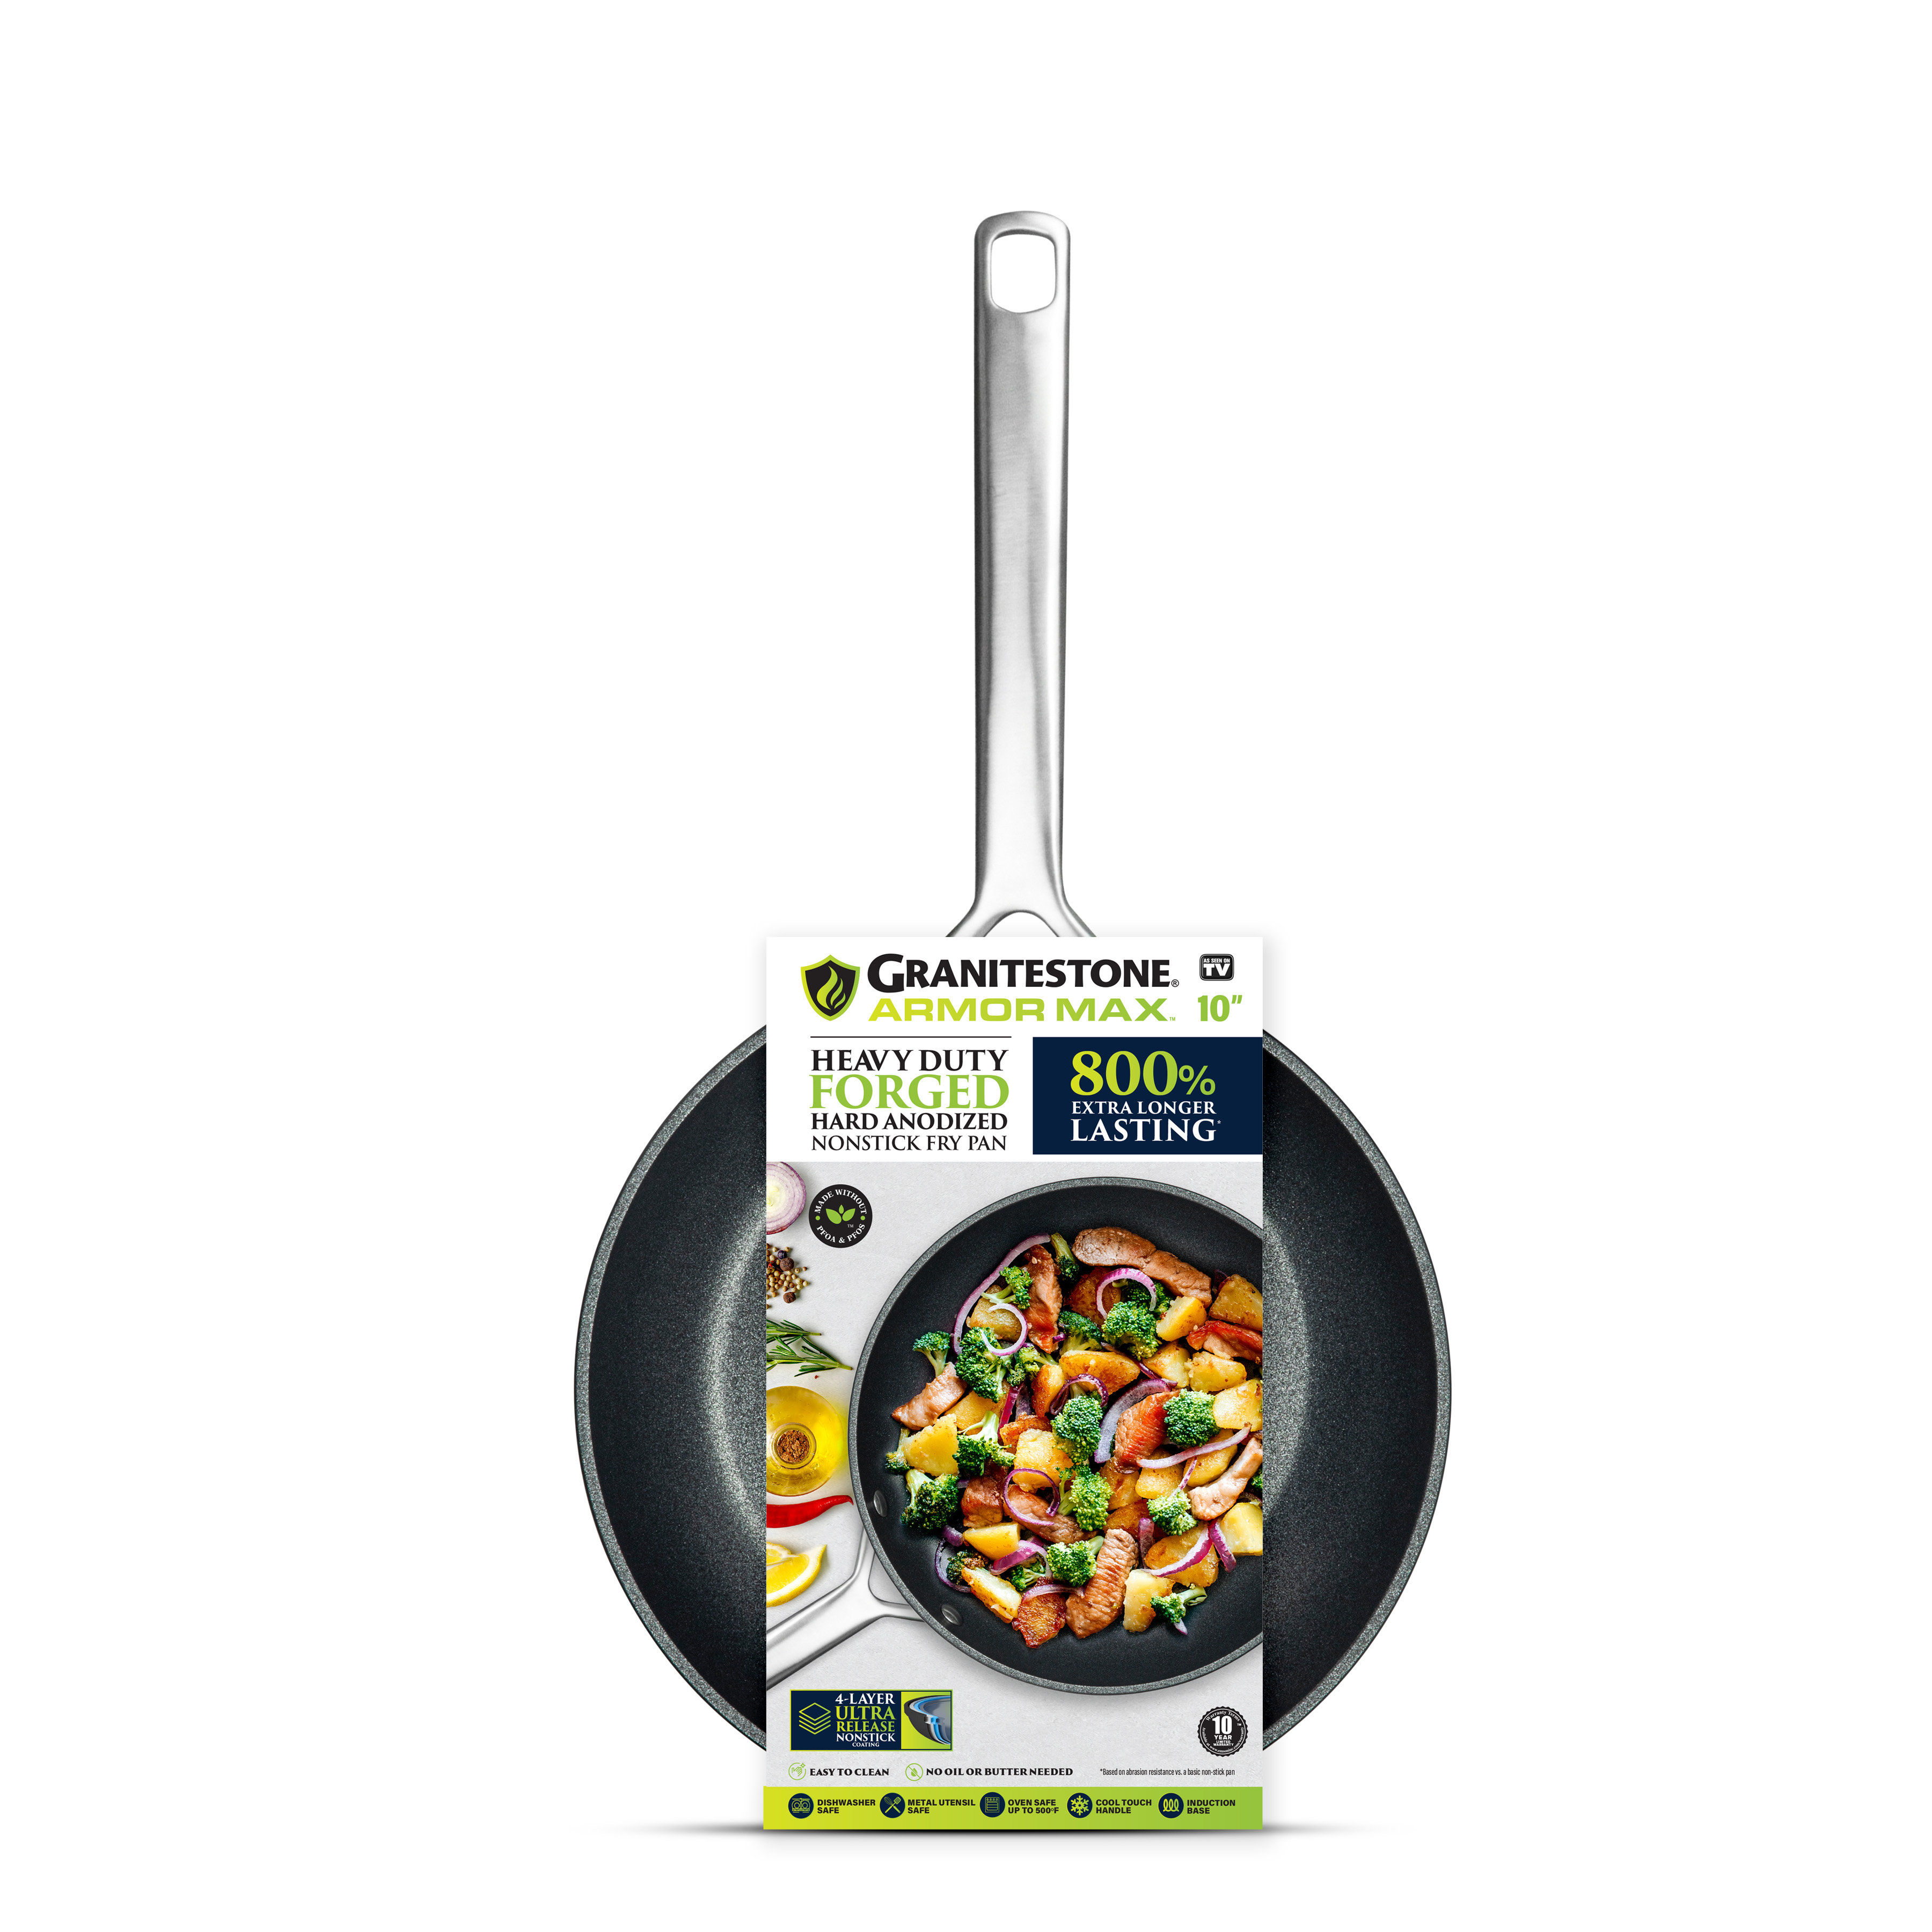 Granitestone Armor Max 10'' Hard Anodized Ultra Durable Nonstick Fry Pan,  Oven & Dishwasher Safe & Reviews